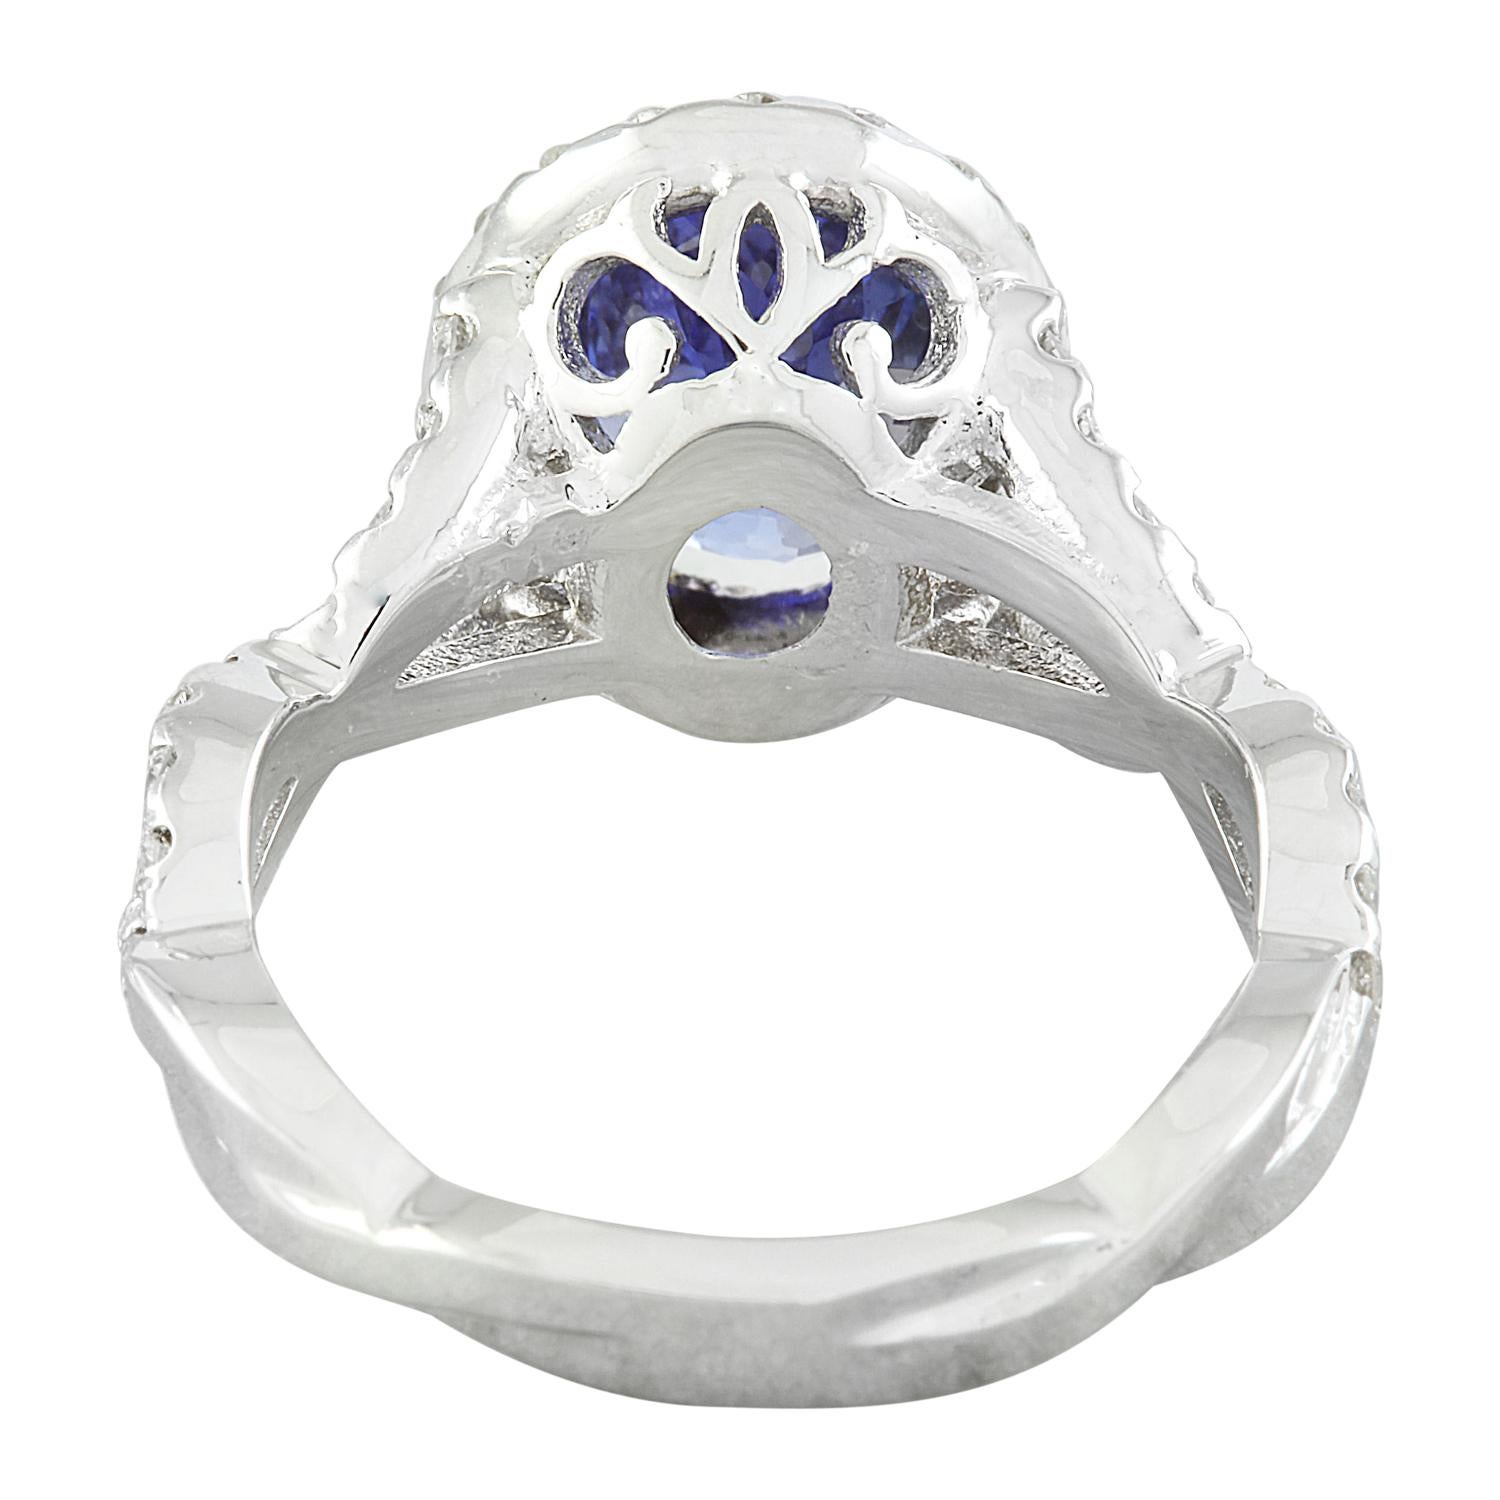 Modern Exquisite Natural Tanzanite Diamond Ring in 14K White Gold For Sale